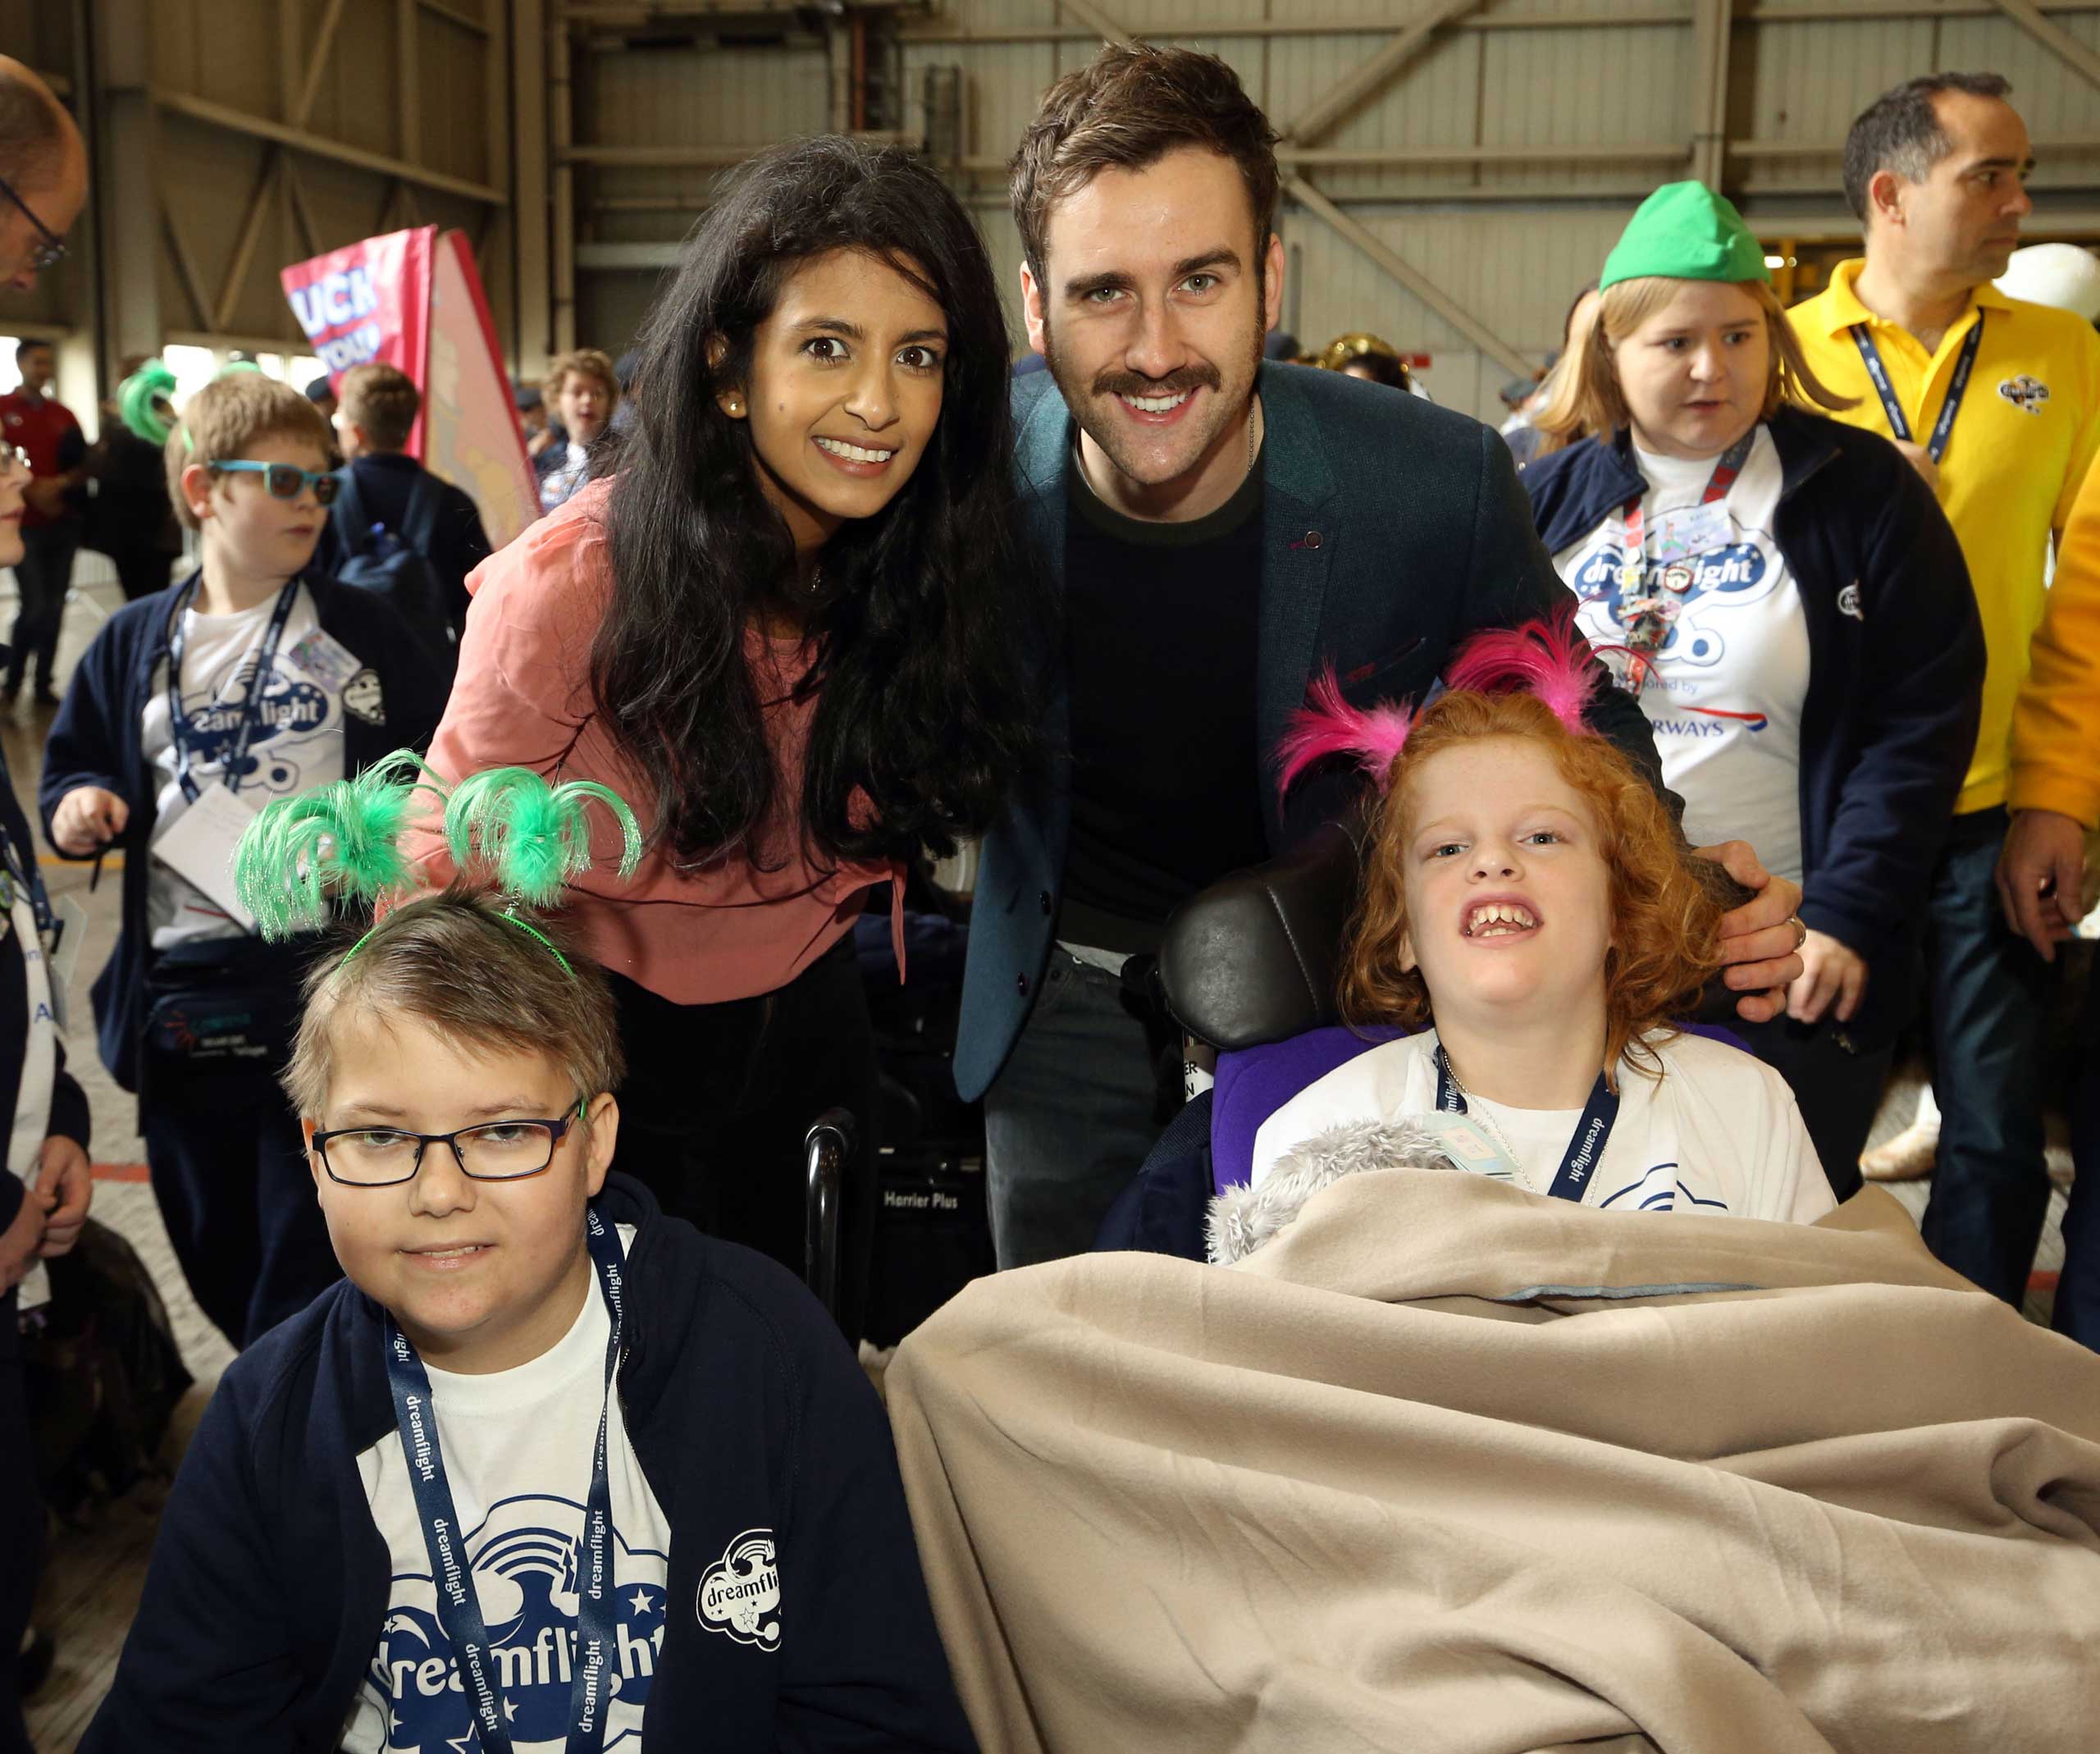 Konnie Huq (centre left) and Matthew Lewis (centre right), as the Dreamflight children are sent off on their trip from Heathrow Airport in London to Orlando in Florida, Oct. 18, 2015. (Steve Parsons—AP Images)